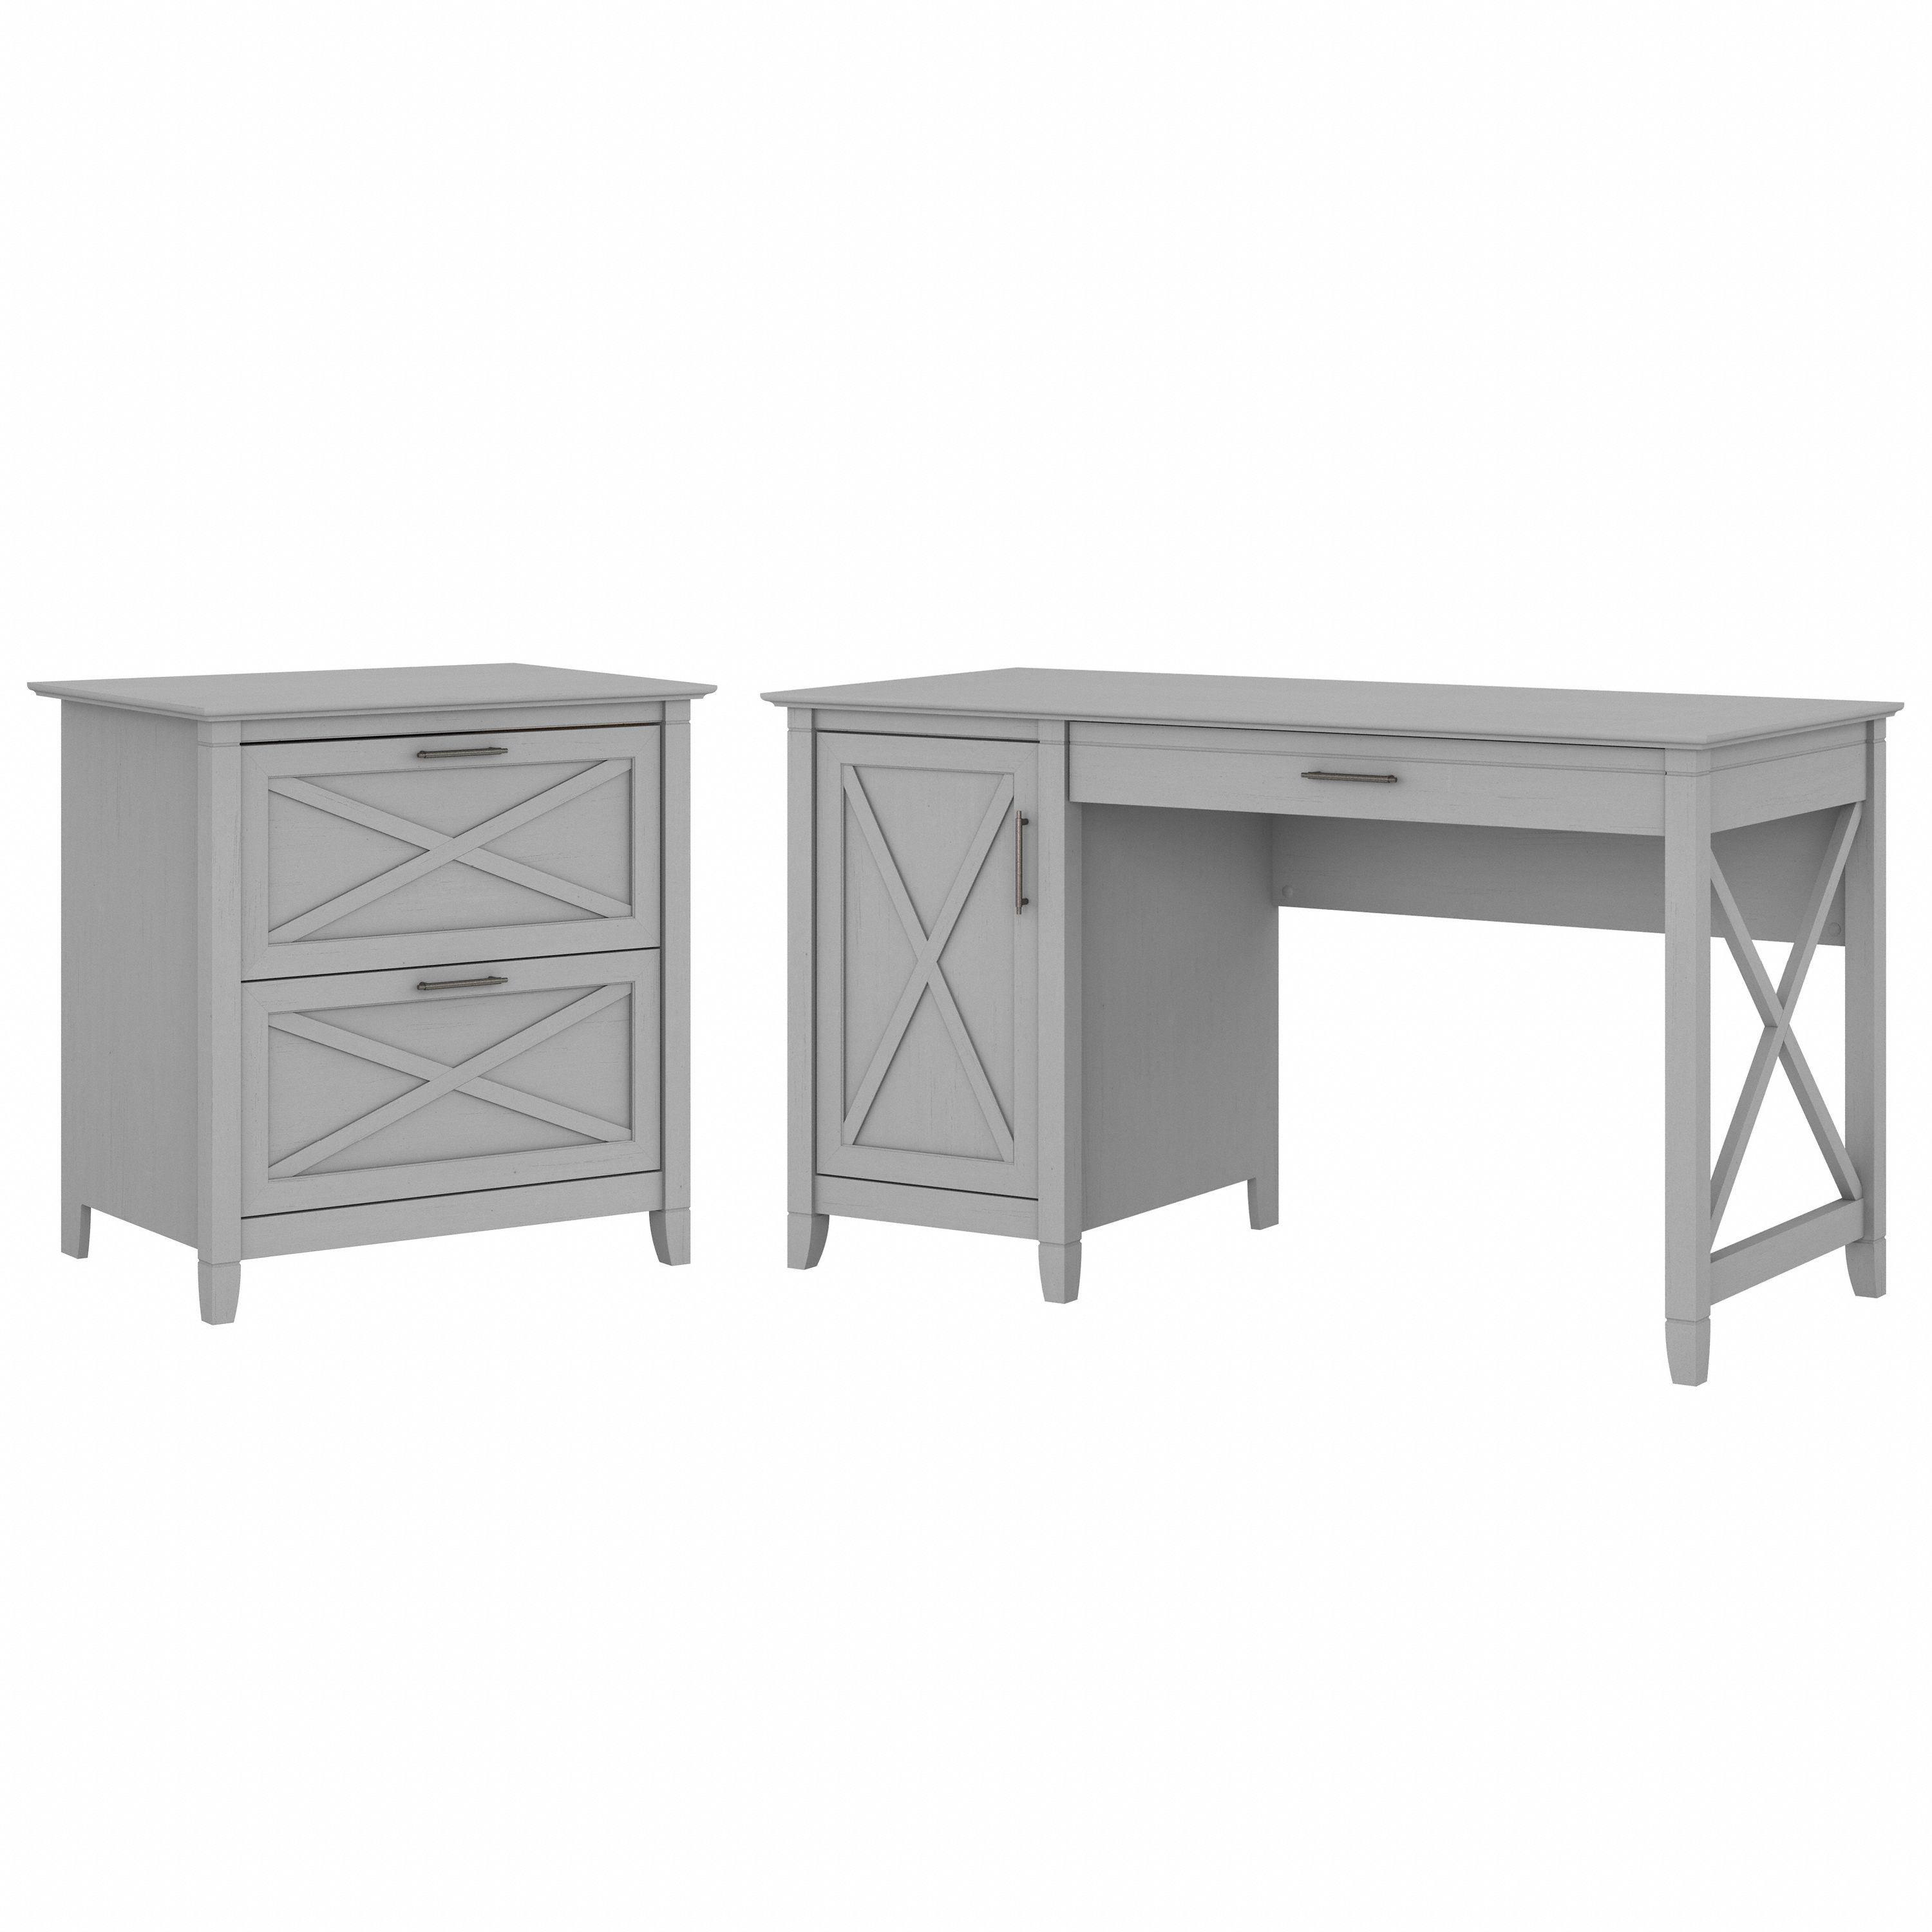 Shop Bush Furniture Key West 54W Computer Desk with Storage and 2 Drawer Lateral File Cabinet 02 KWS008CG #color_cape cod gray